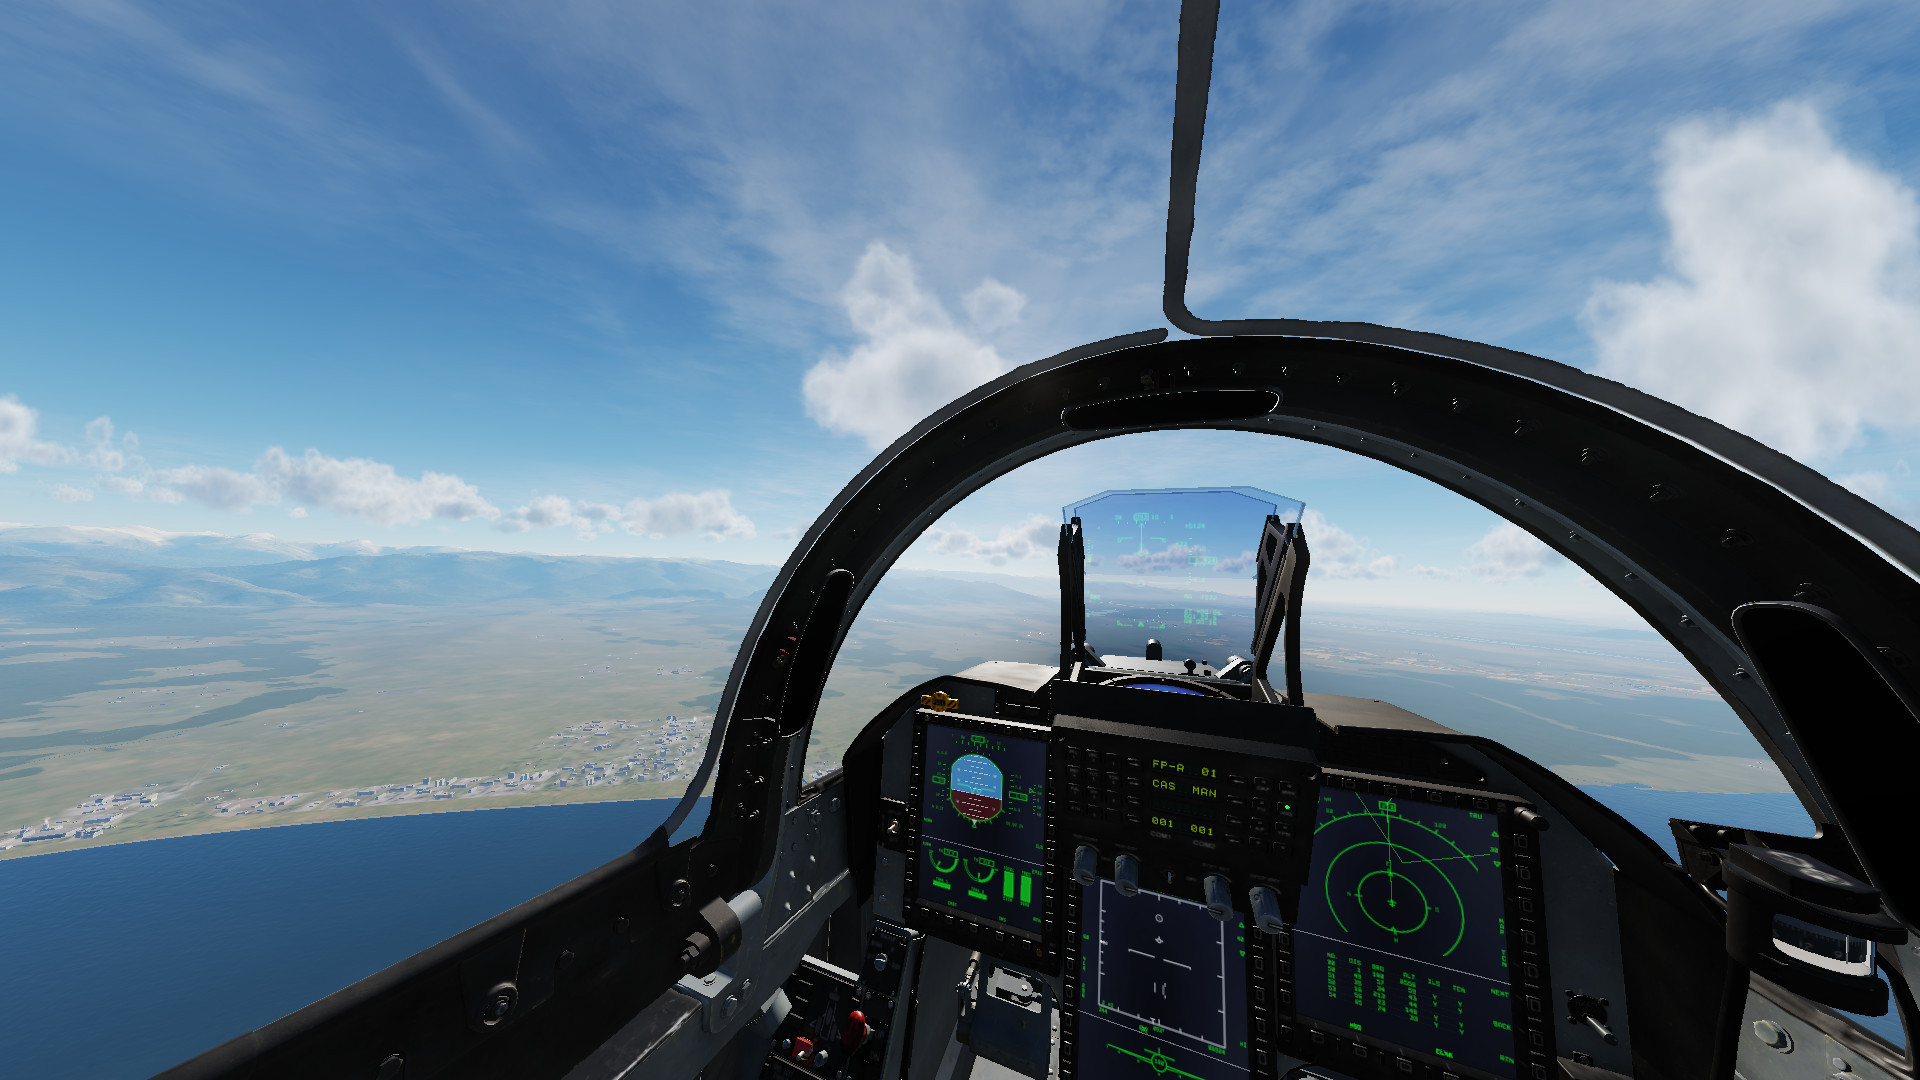 JF-17 clean cockpit without fake reflections